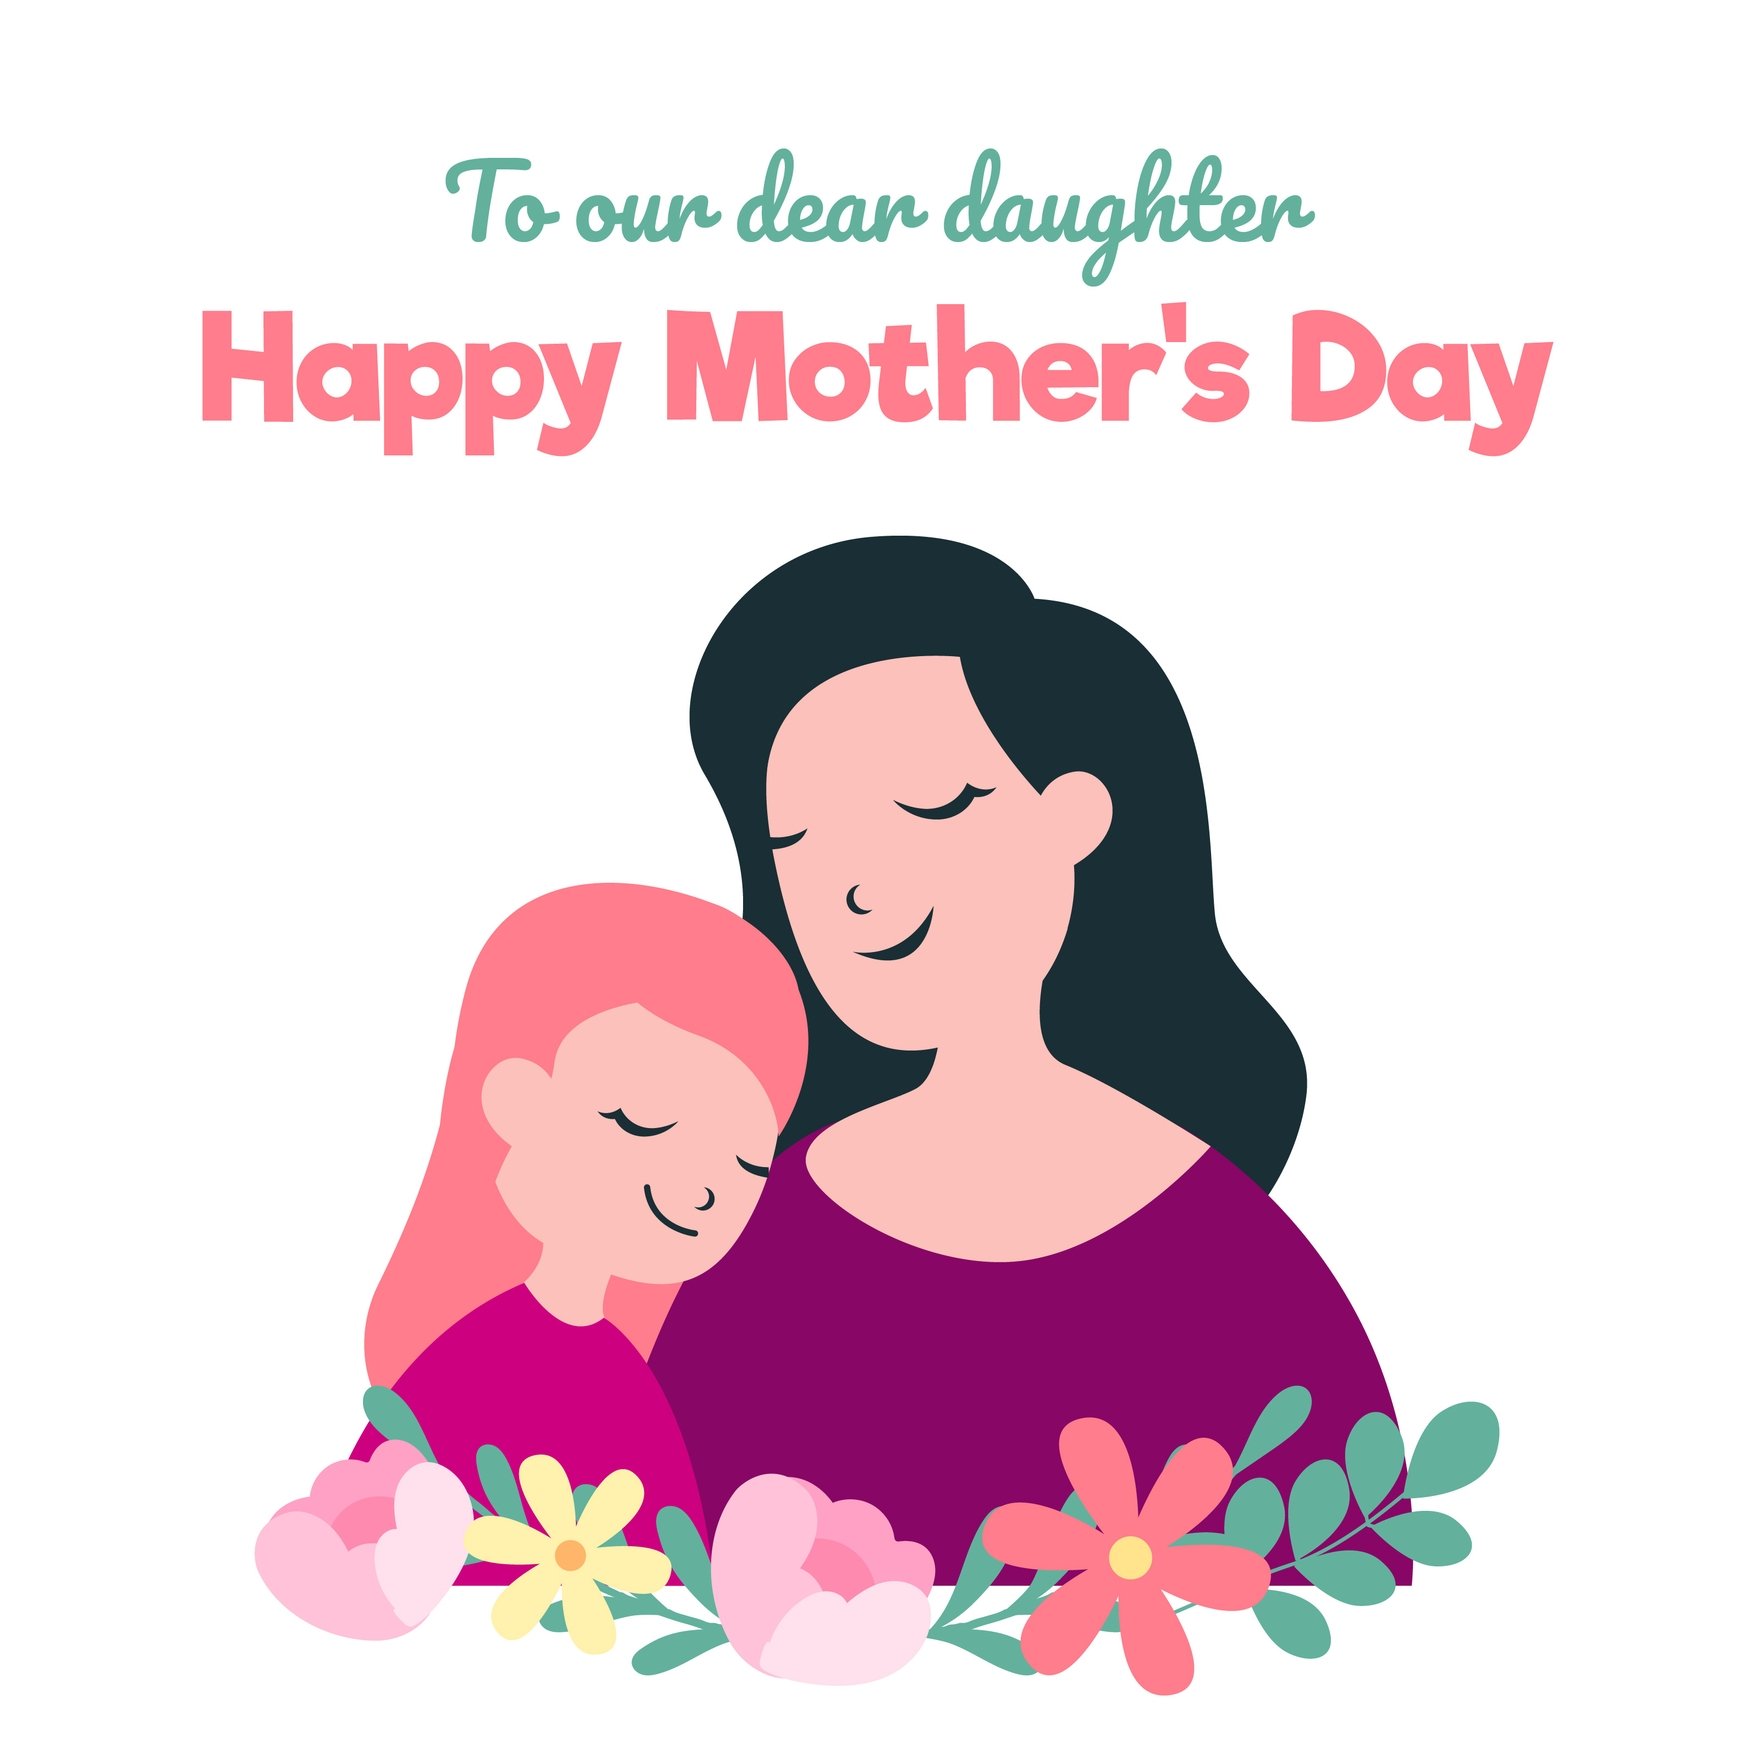 Happy Mother's Day Daughter GIF in Illustrator, SVG, JPG, GIF, EPS, PNG ...